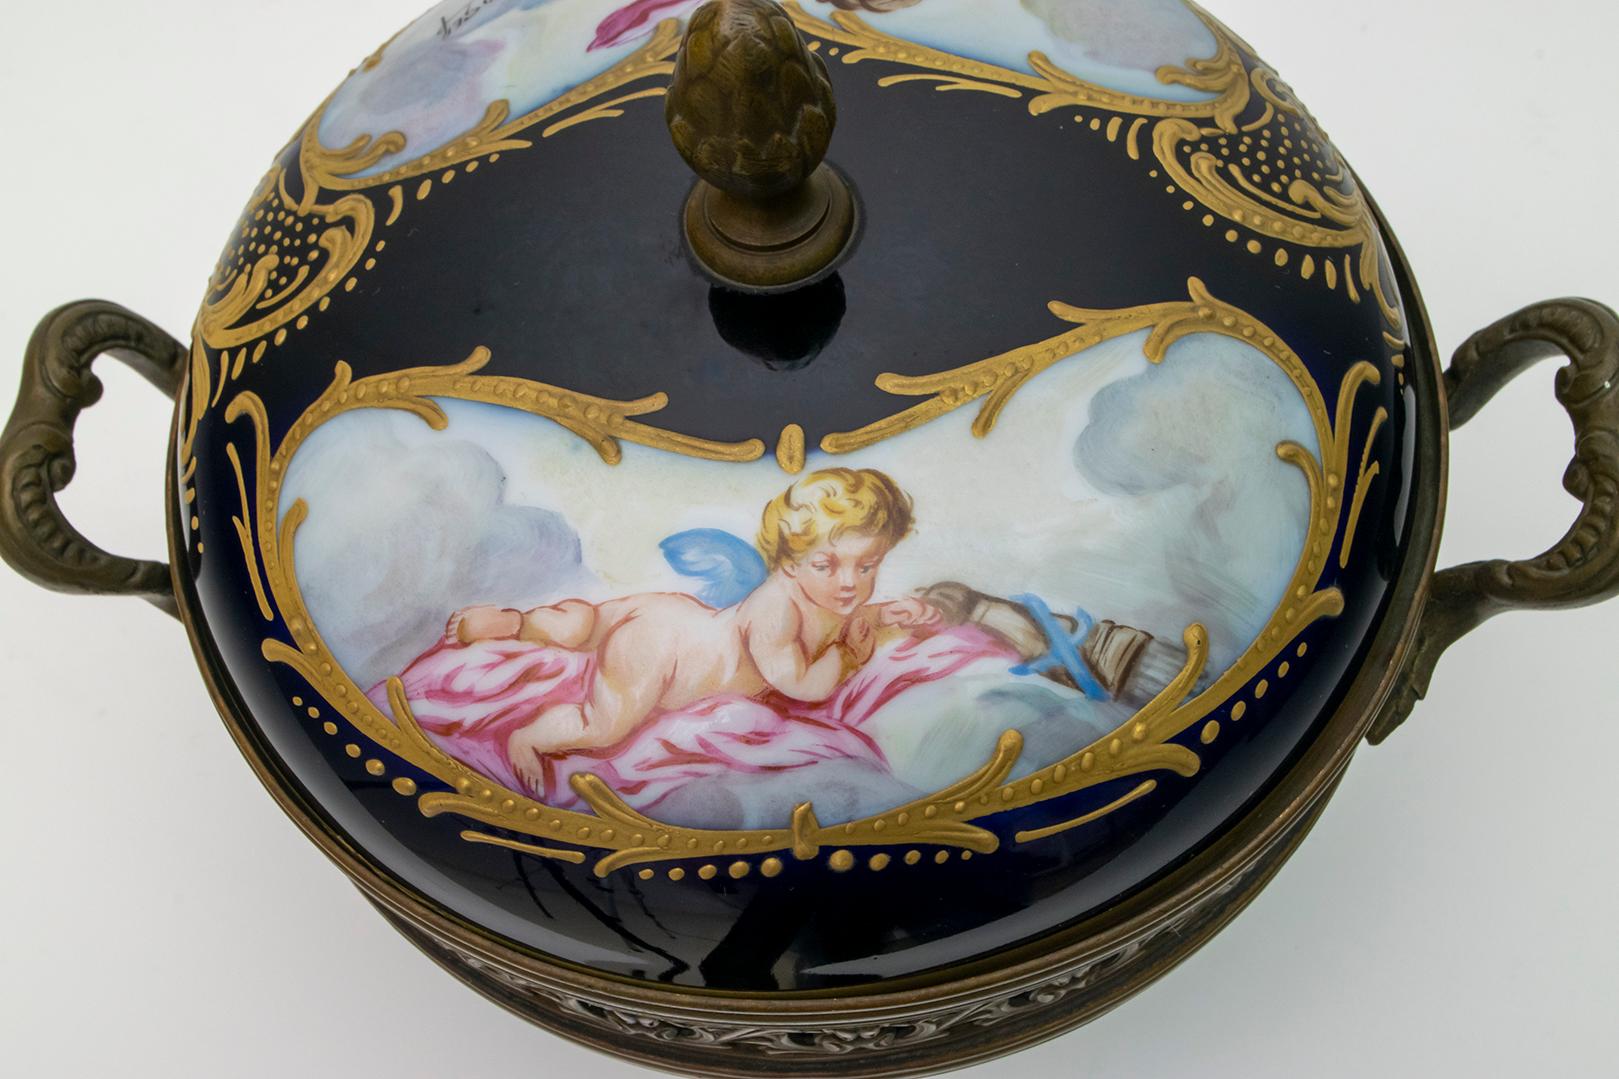 Signed E. Froger 19th Century French Porcelain Potpourri by Sevres, 1880 For Sale 1